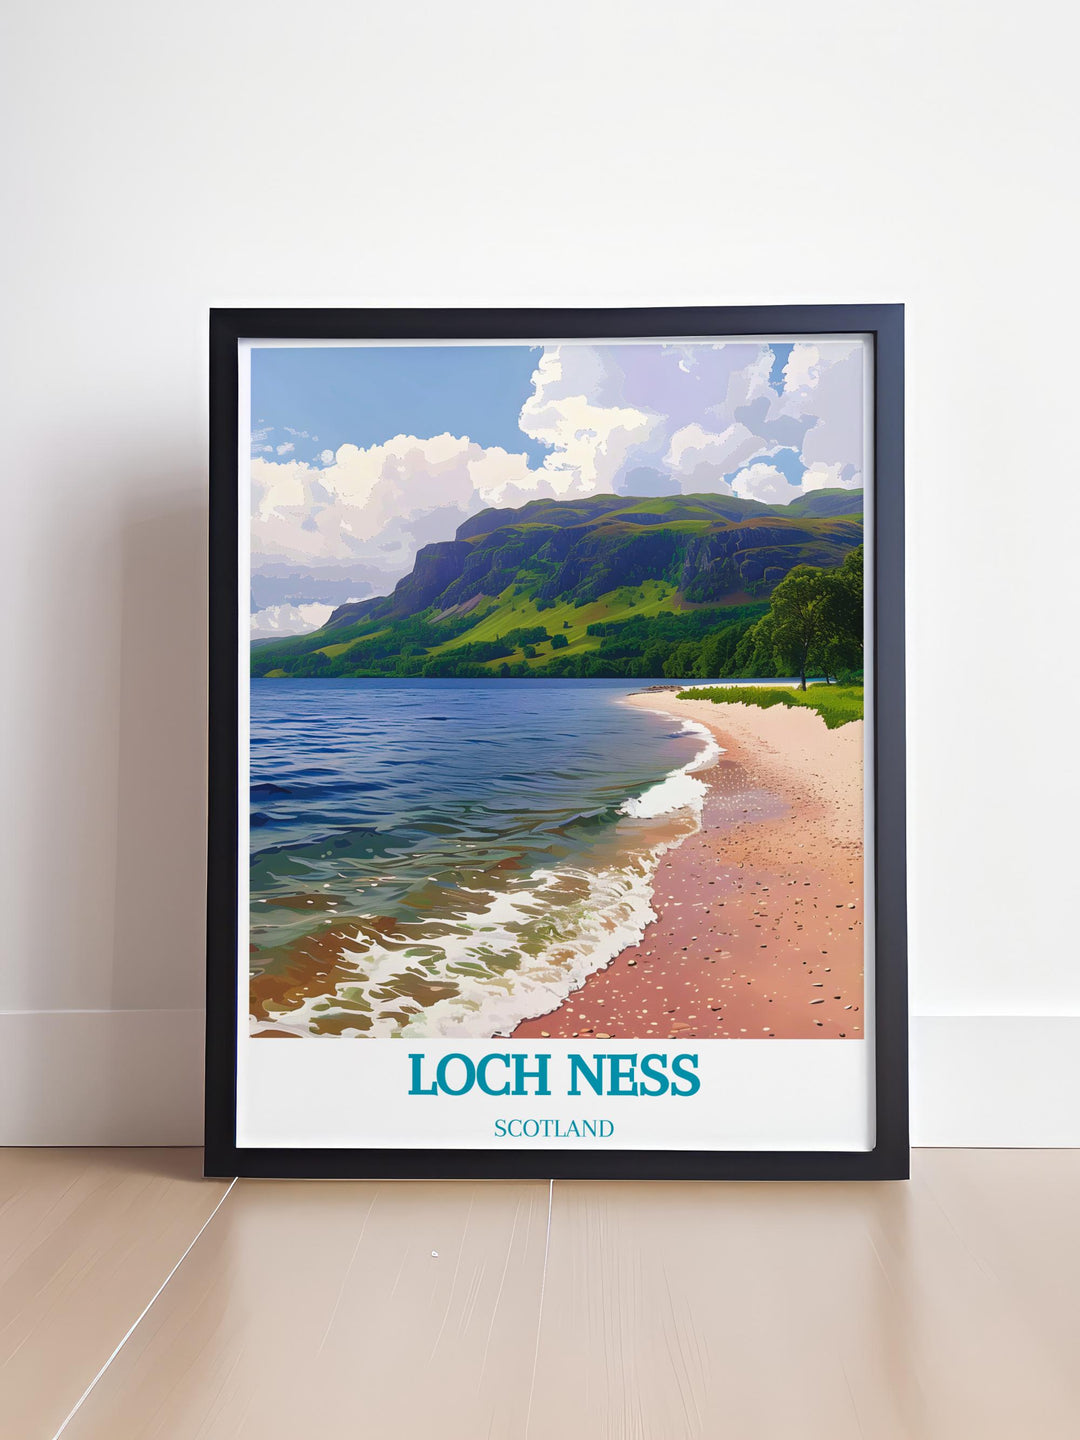 Travel inspired art print of Loch Ness, highlighting the famous lake and its surrounding natural beauty.